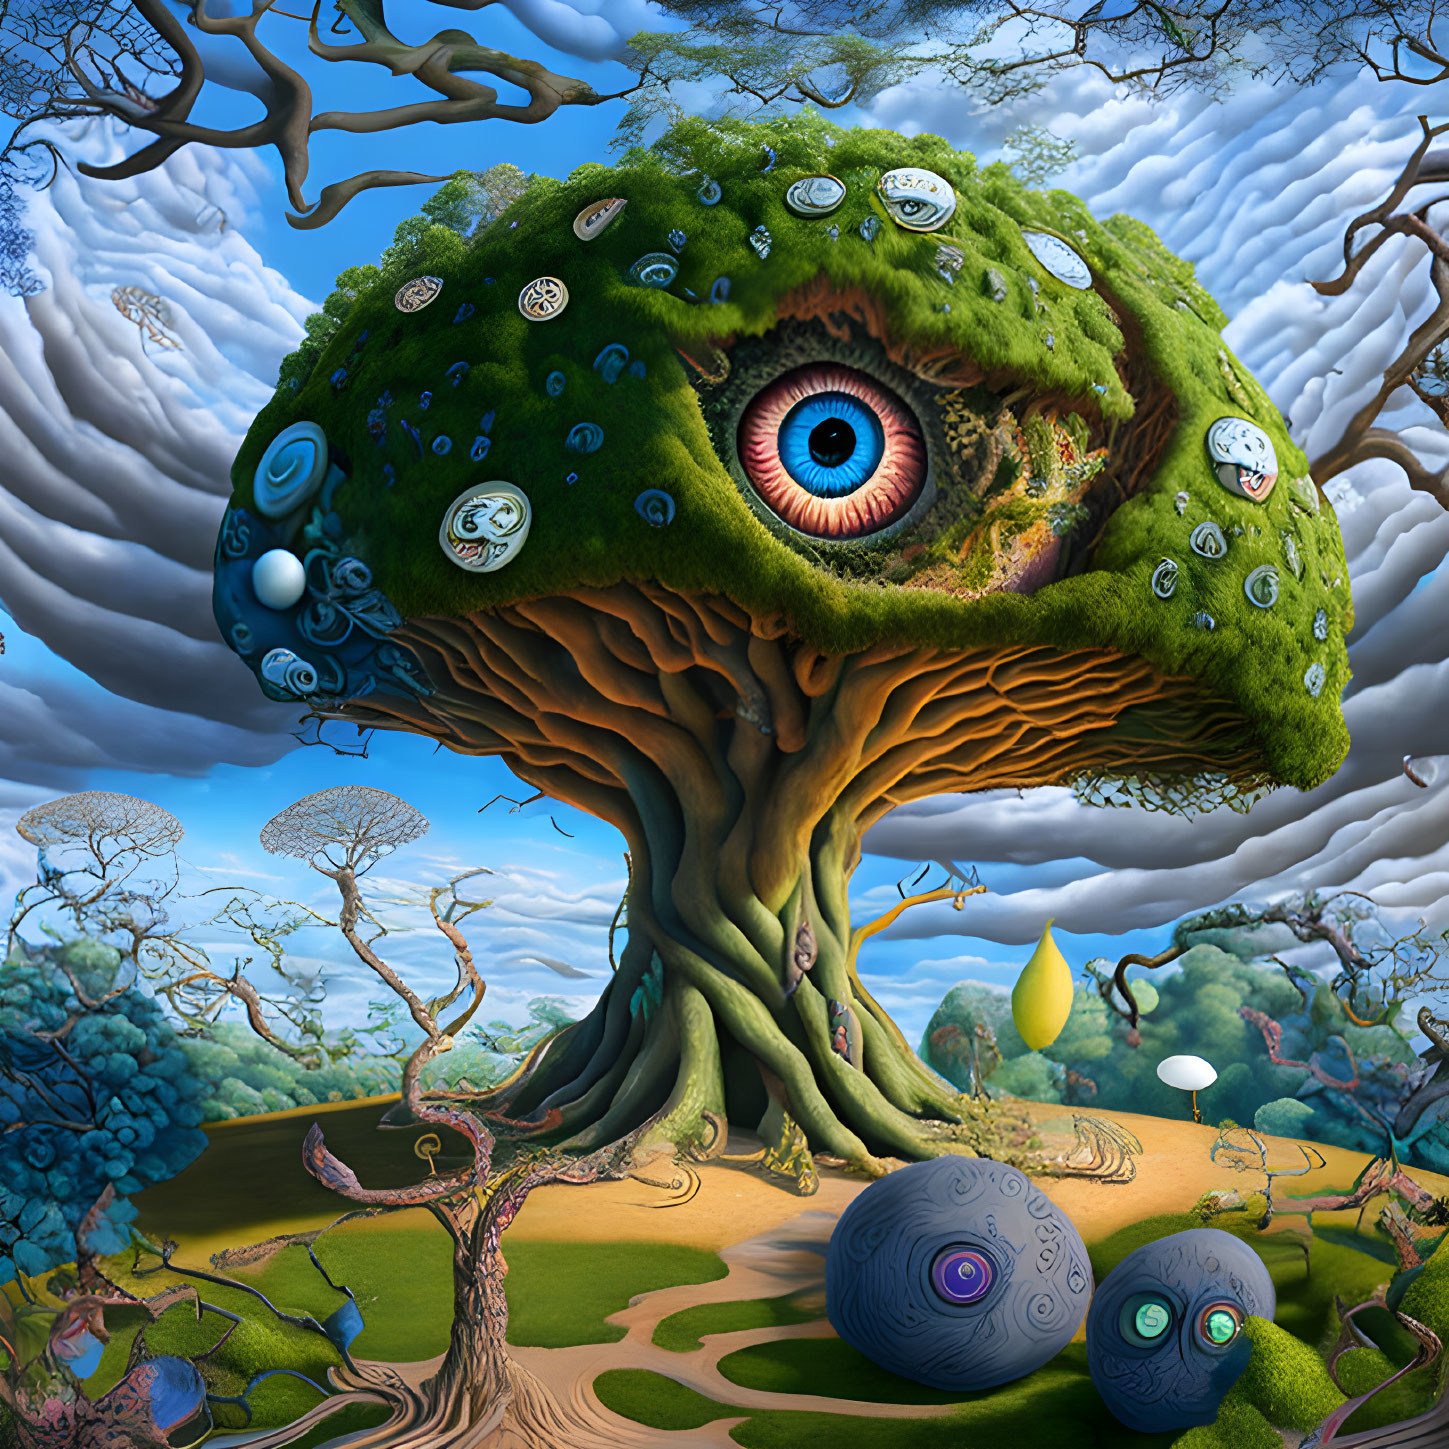 Surreal landscape with eye-shaped tree, swirling sky, whimsical hills, and colorful spheres